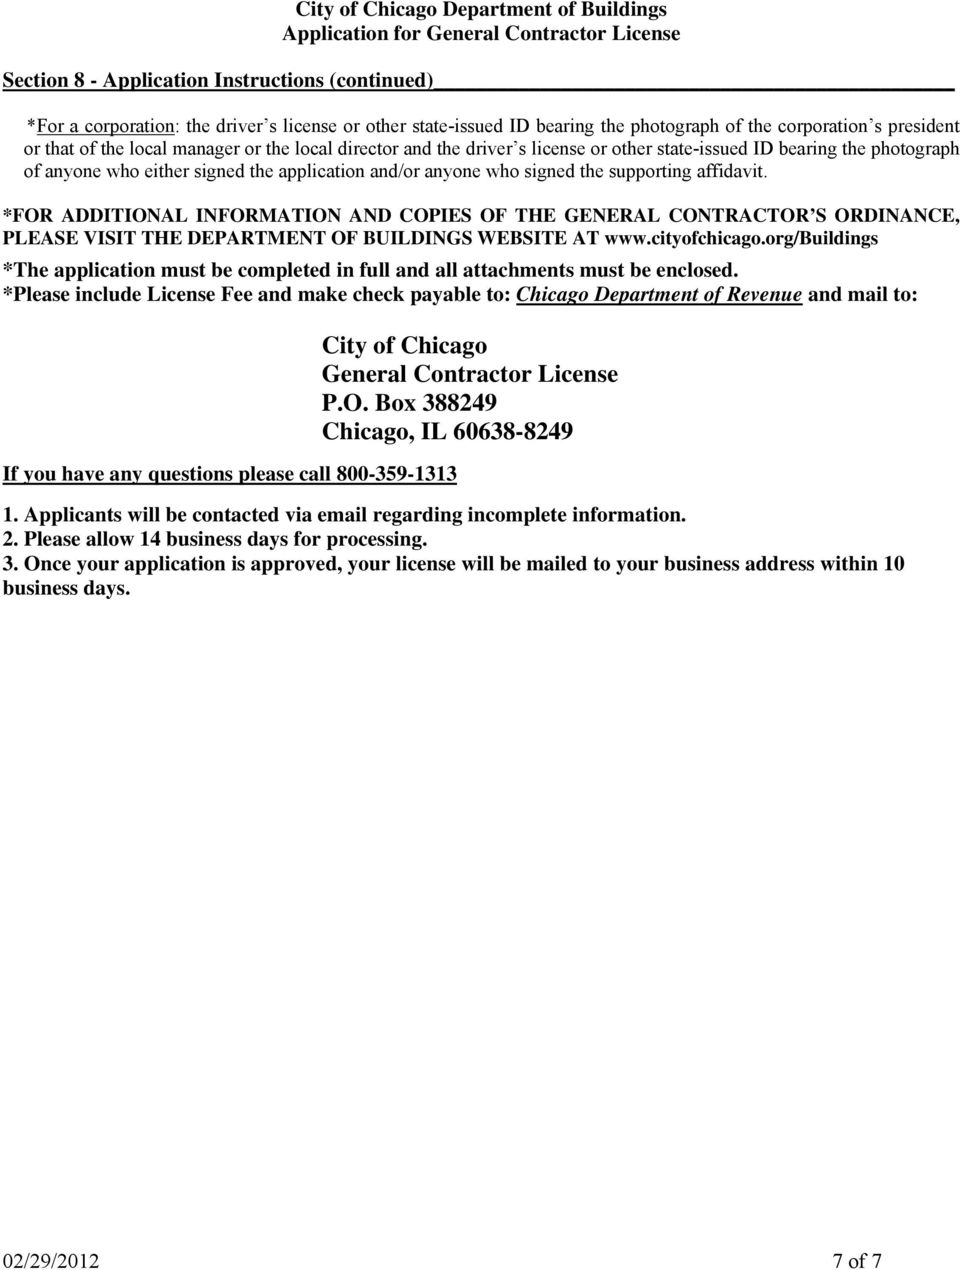 *FOR ADDITIONAL INFORMATION AND COPIES OF THE GENERAL CONTRACTOR S ORDINANCE, PLEASE VISIT THE DEPARTMENT OF BUILDINGS WEBSITE AT www.cityofchicago.